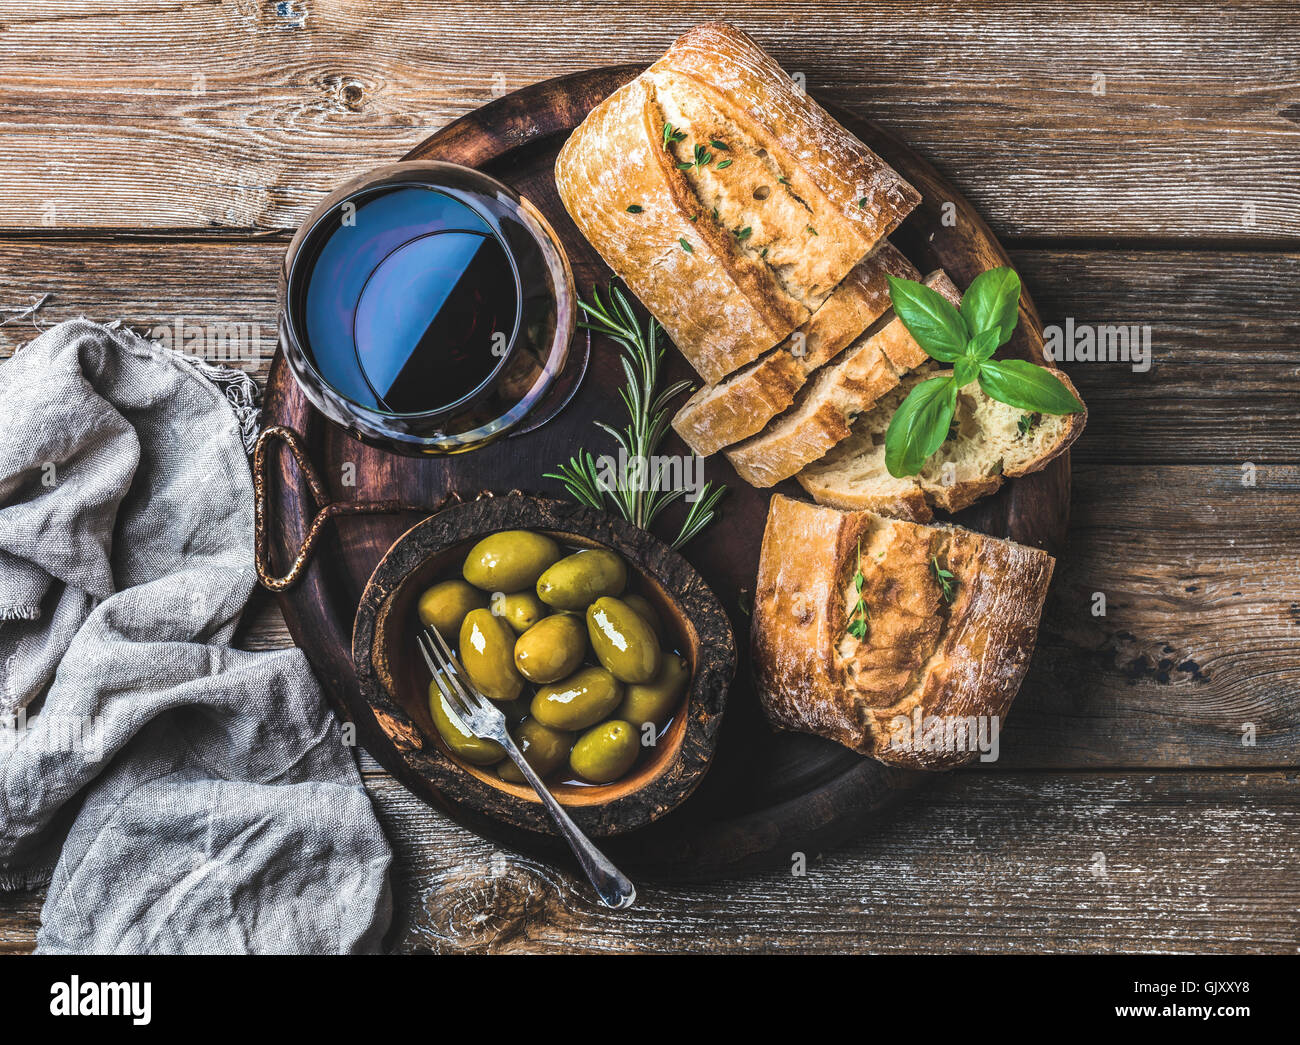 Wine snack set. Glass of red wine, green mediterranean olives, freshly baked ciabatta bread in dark wooden plate over rustic woo Stock Photo